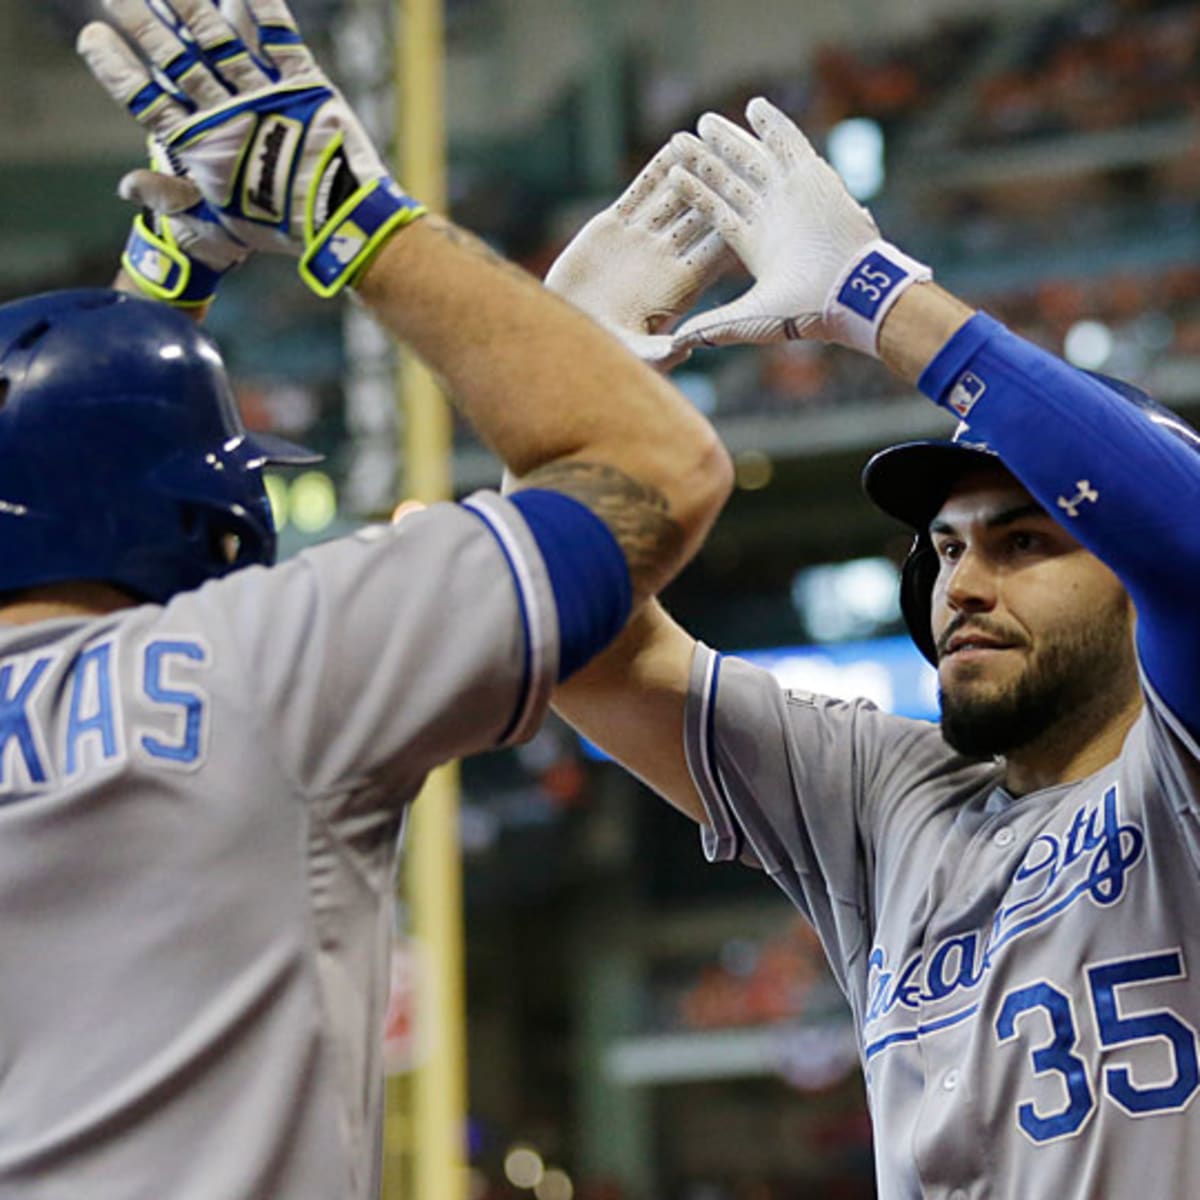 Game 2 of the Astros-Royals ALDS was just one big dance party